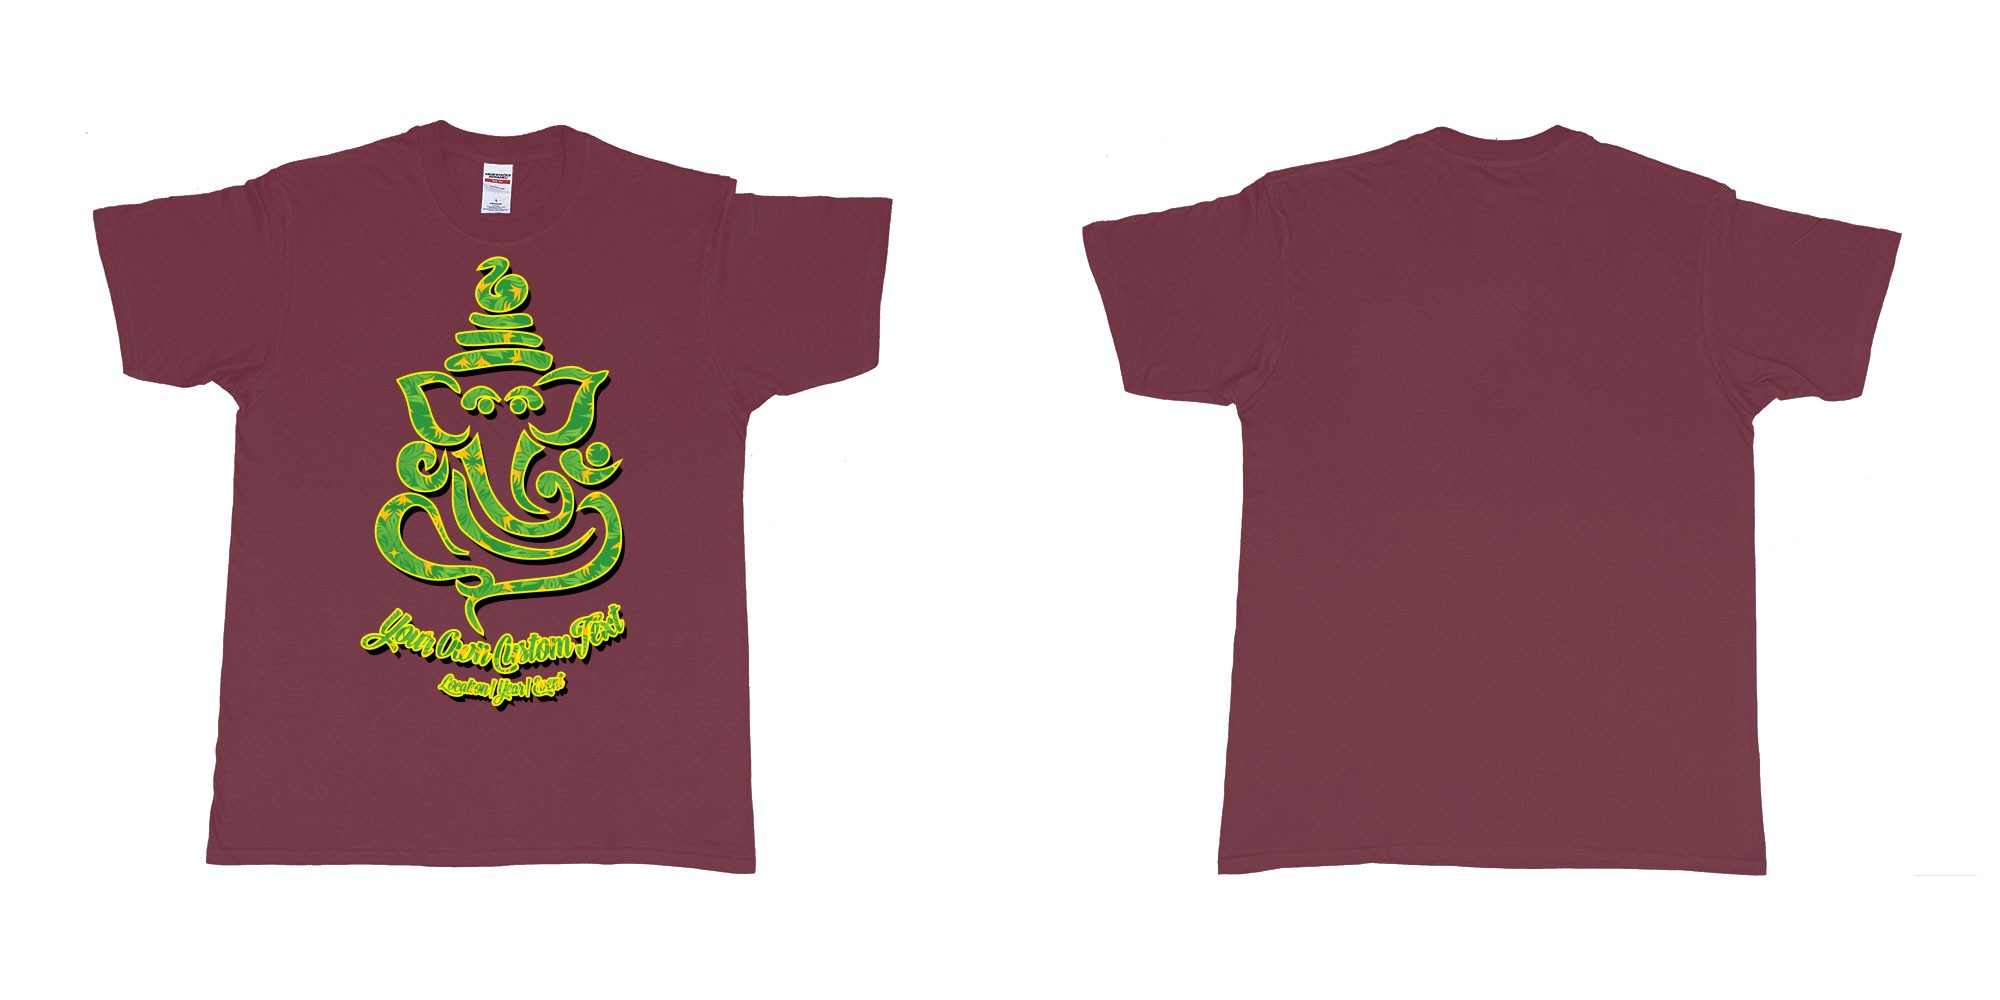 Custom tshirt design ganesh soft jungle yoga customize own design in fabric color marron choice your own text made in Bali by The Pirate Way